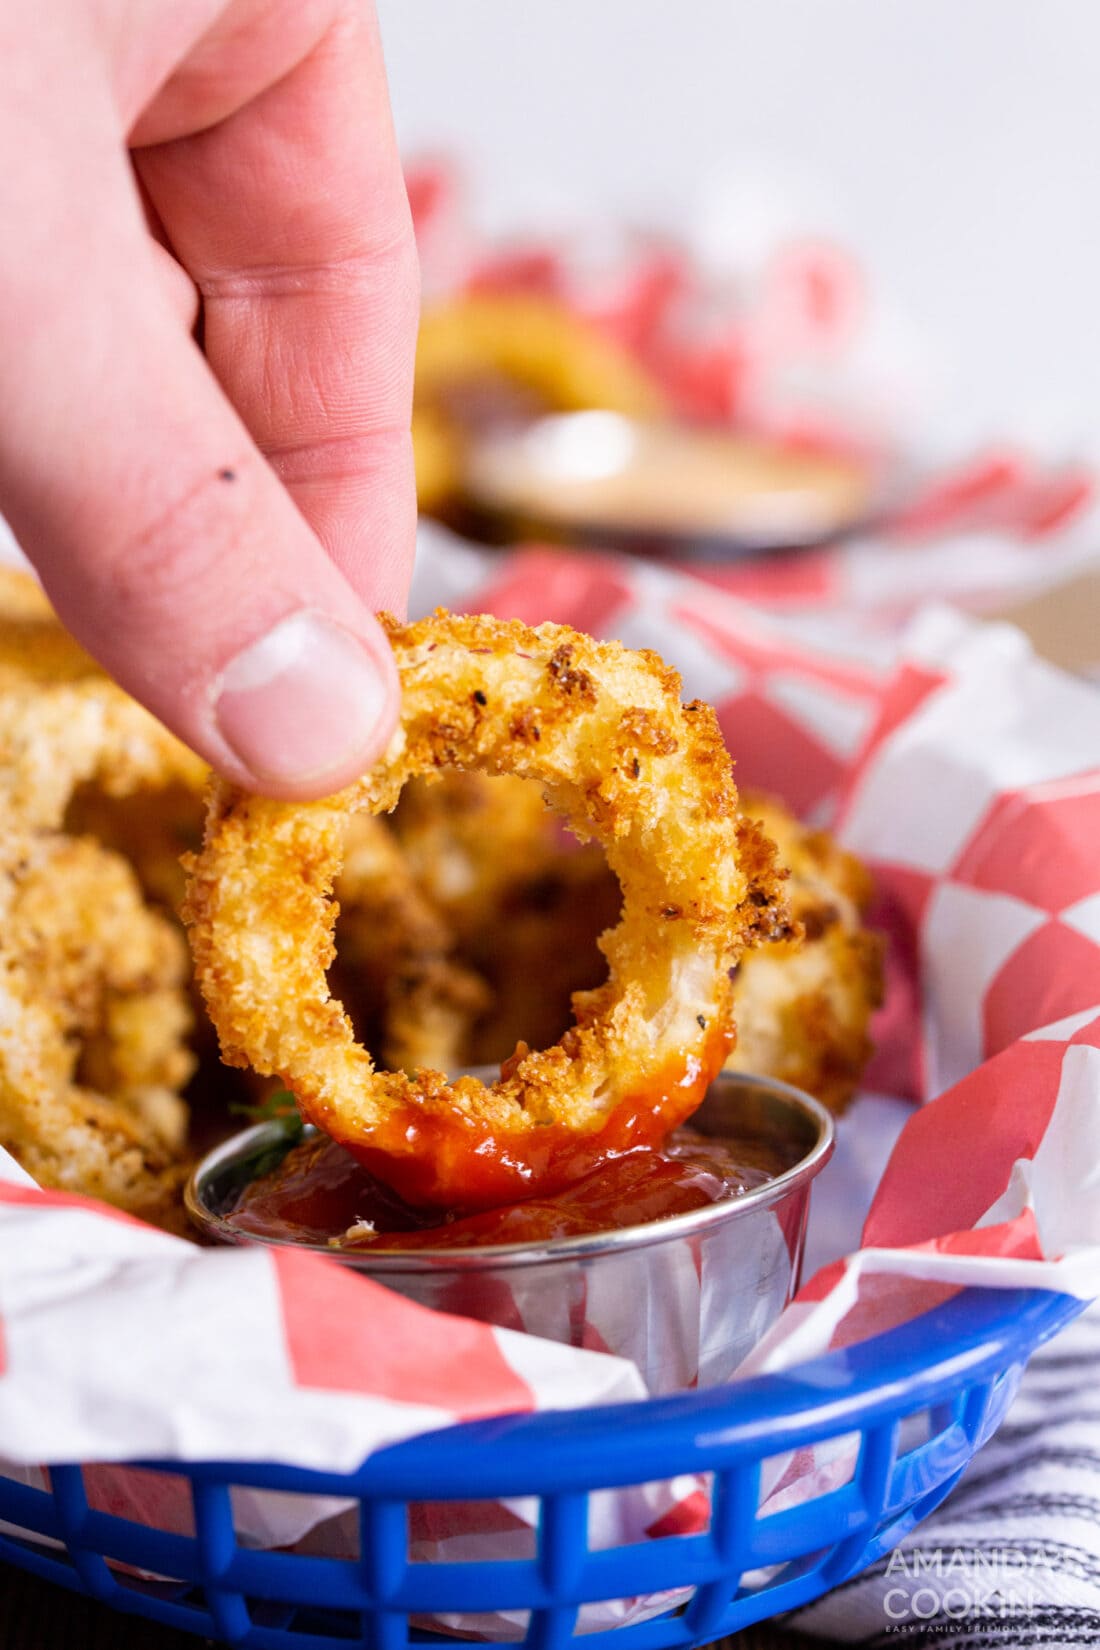 Dipping an onion ring in ketchup